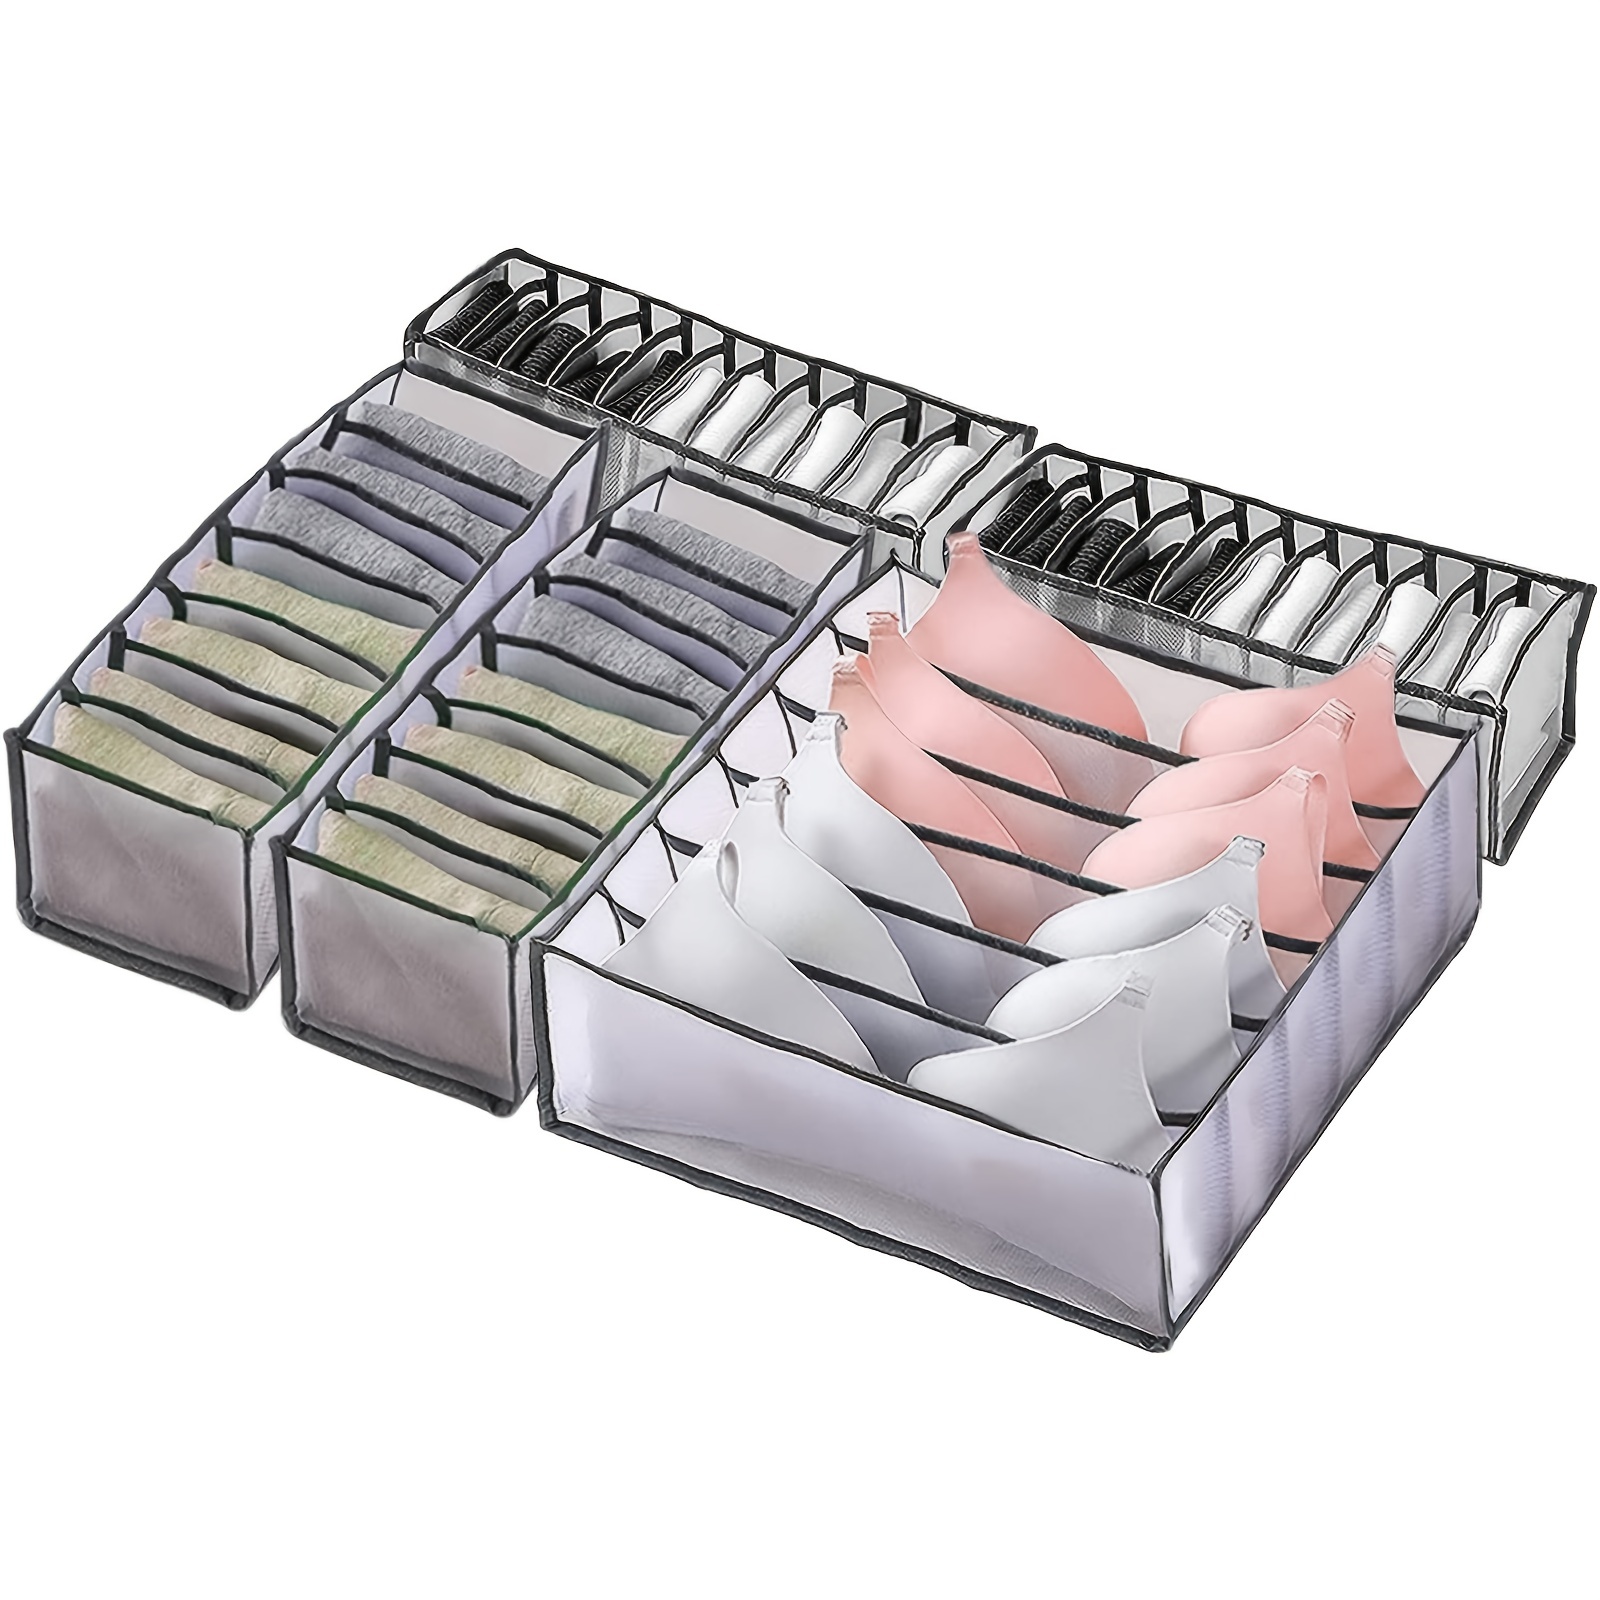 5pcs/set, Collapsible Underwear Drawer Organizer Set - Foldable Storage  Boxes for Socks, Bras, Ties, Lingerie, and More - Includes 6/7/7/11/11 Cell  Di